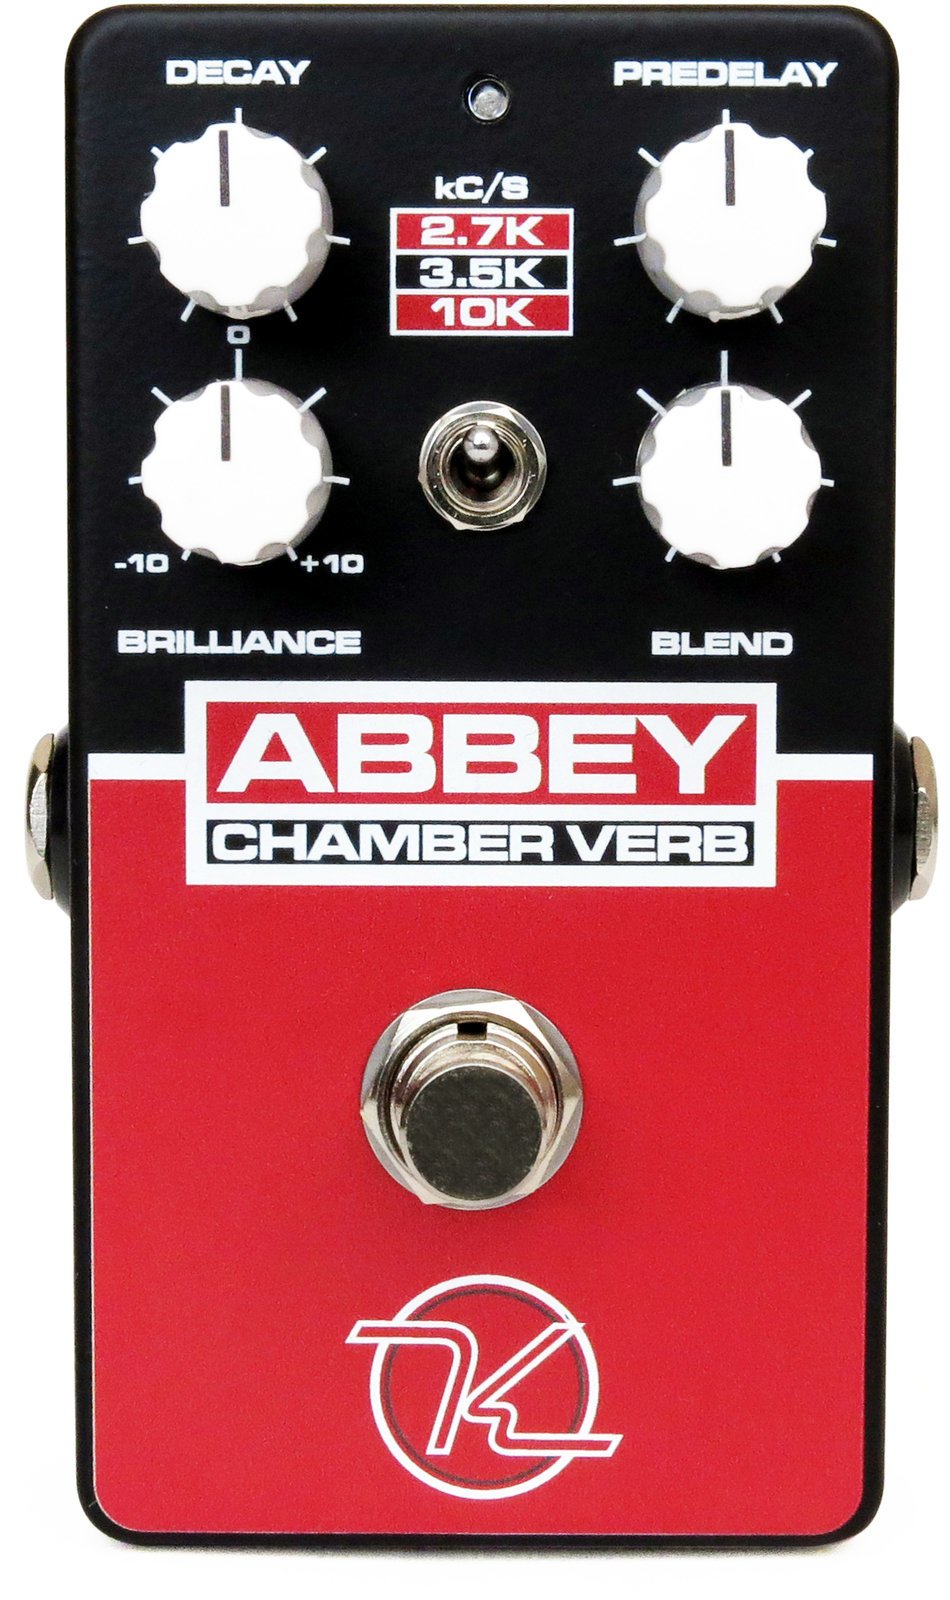 Guitar Effect Keeley Abbey Chamber Verb